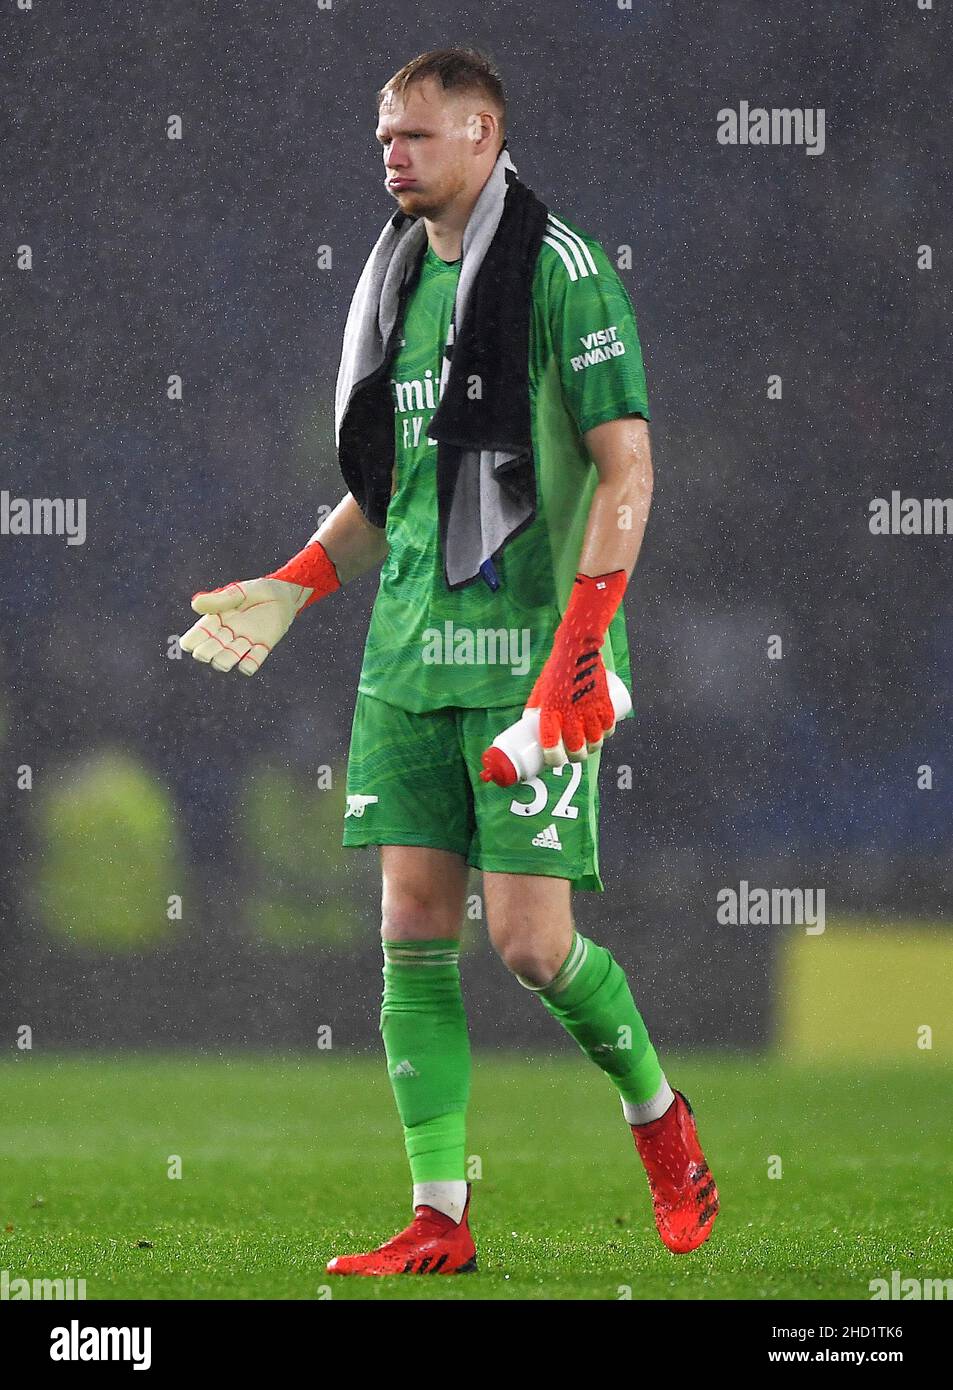 Aaron Ramsdale of Arsenal - Brighton & Hove Albion v Arsenal, Premier League, Amex Stadium, Brighton, UK - 2nd October 2021  Editorial Use Only - DataCo restrictions apply Stock Photo